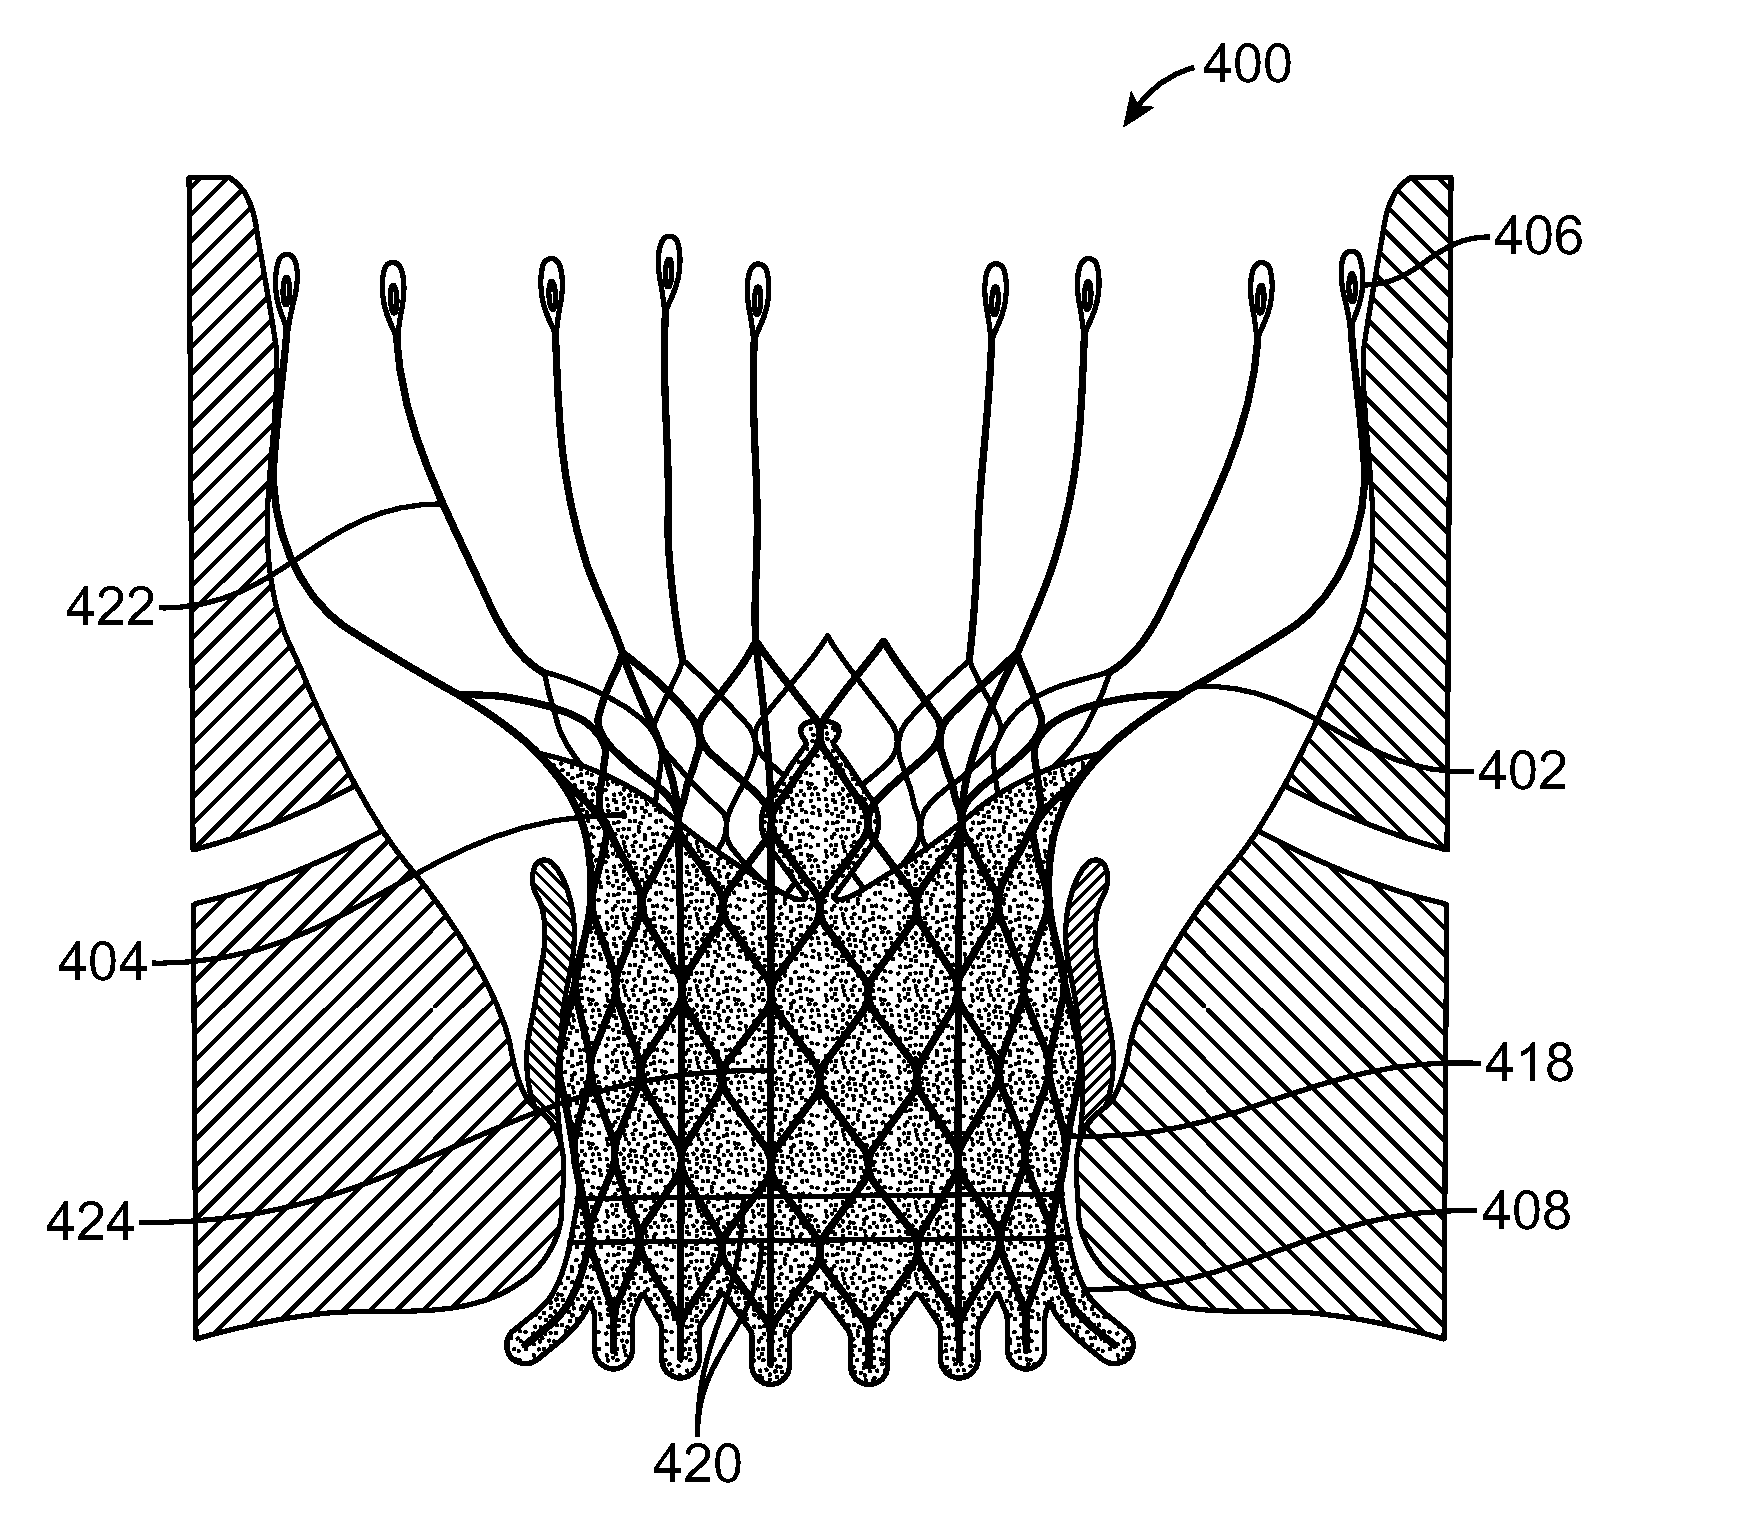 Prosthetic Valve With Device for Restricting Expansion